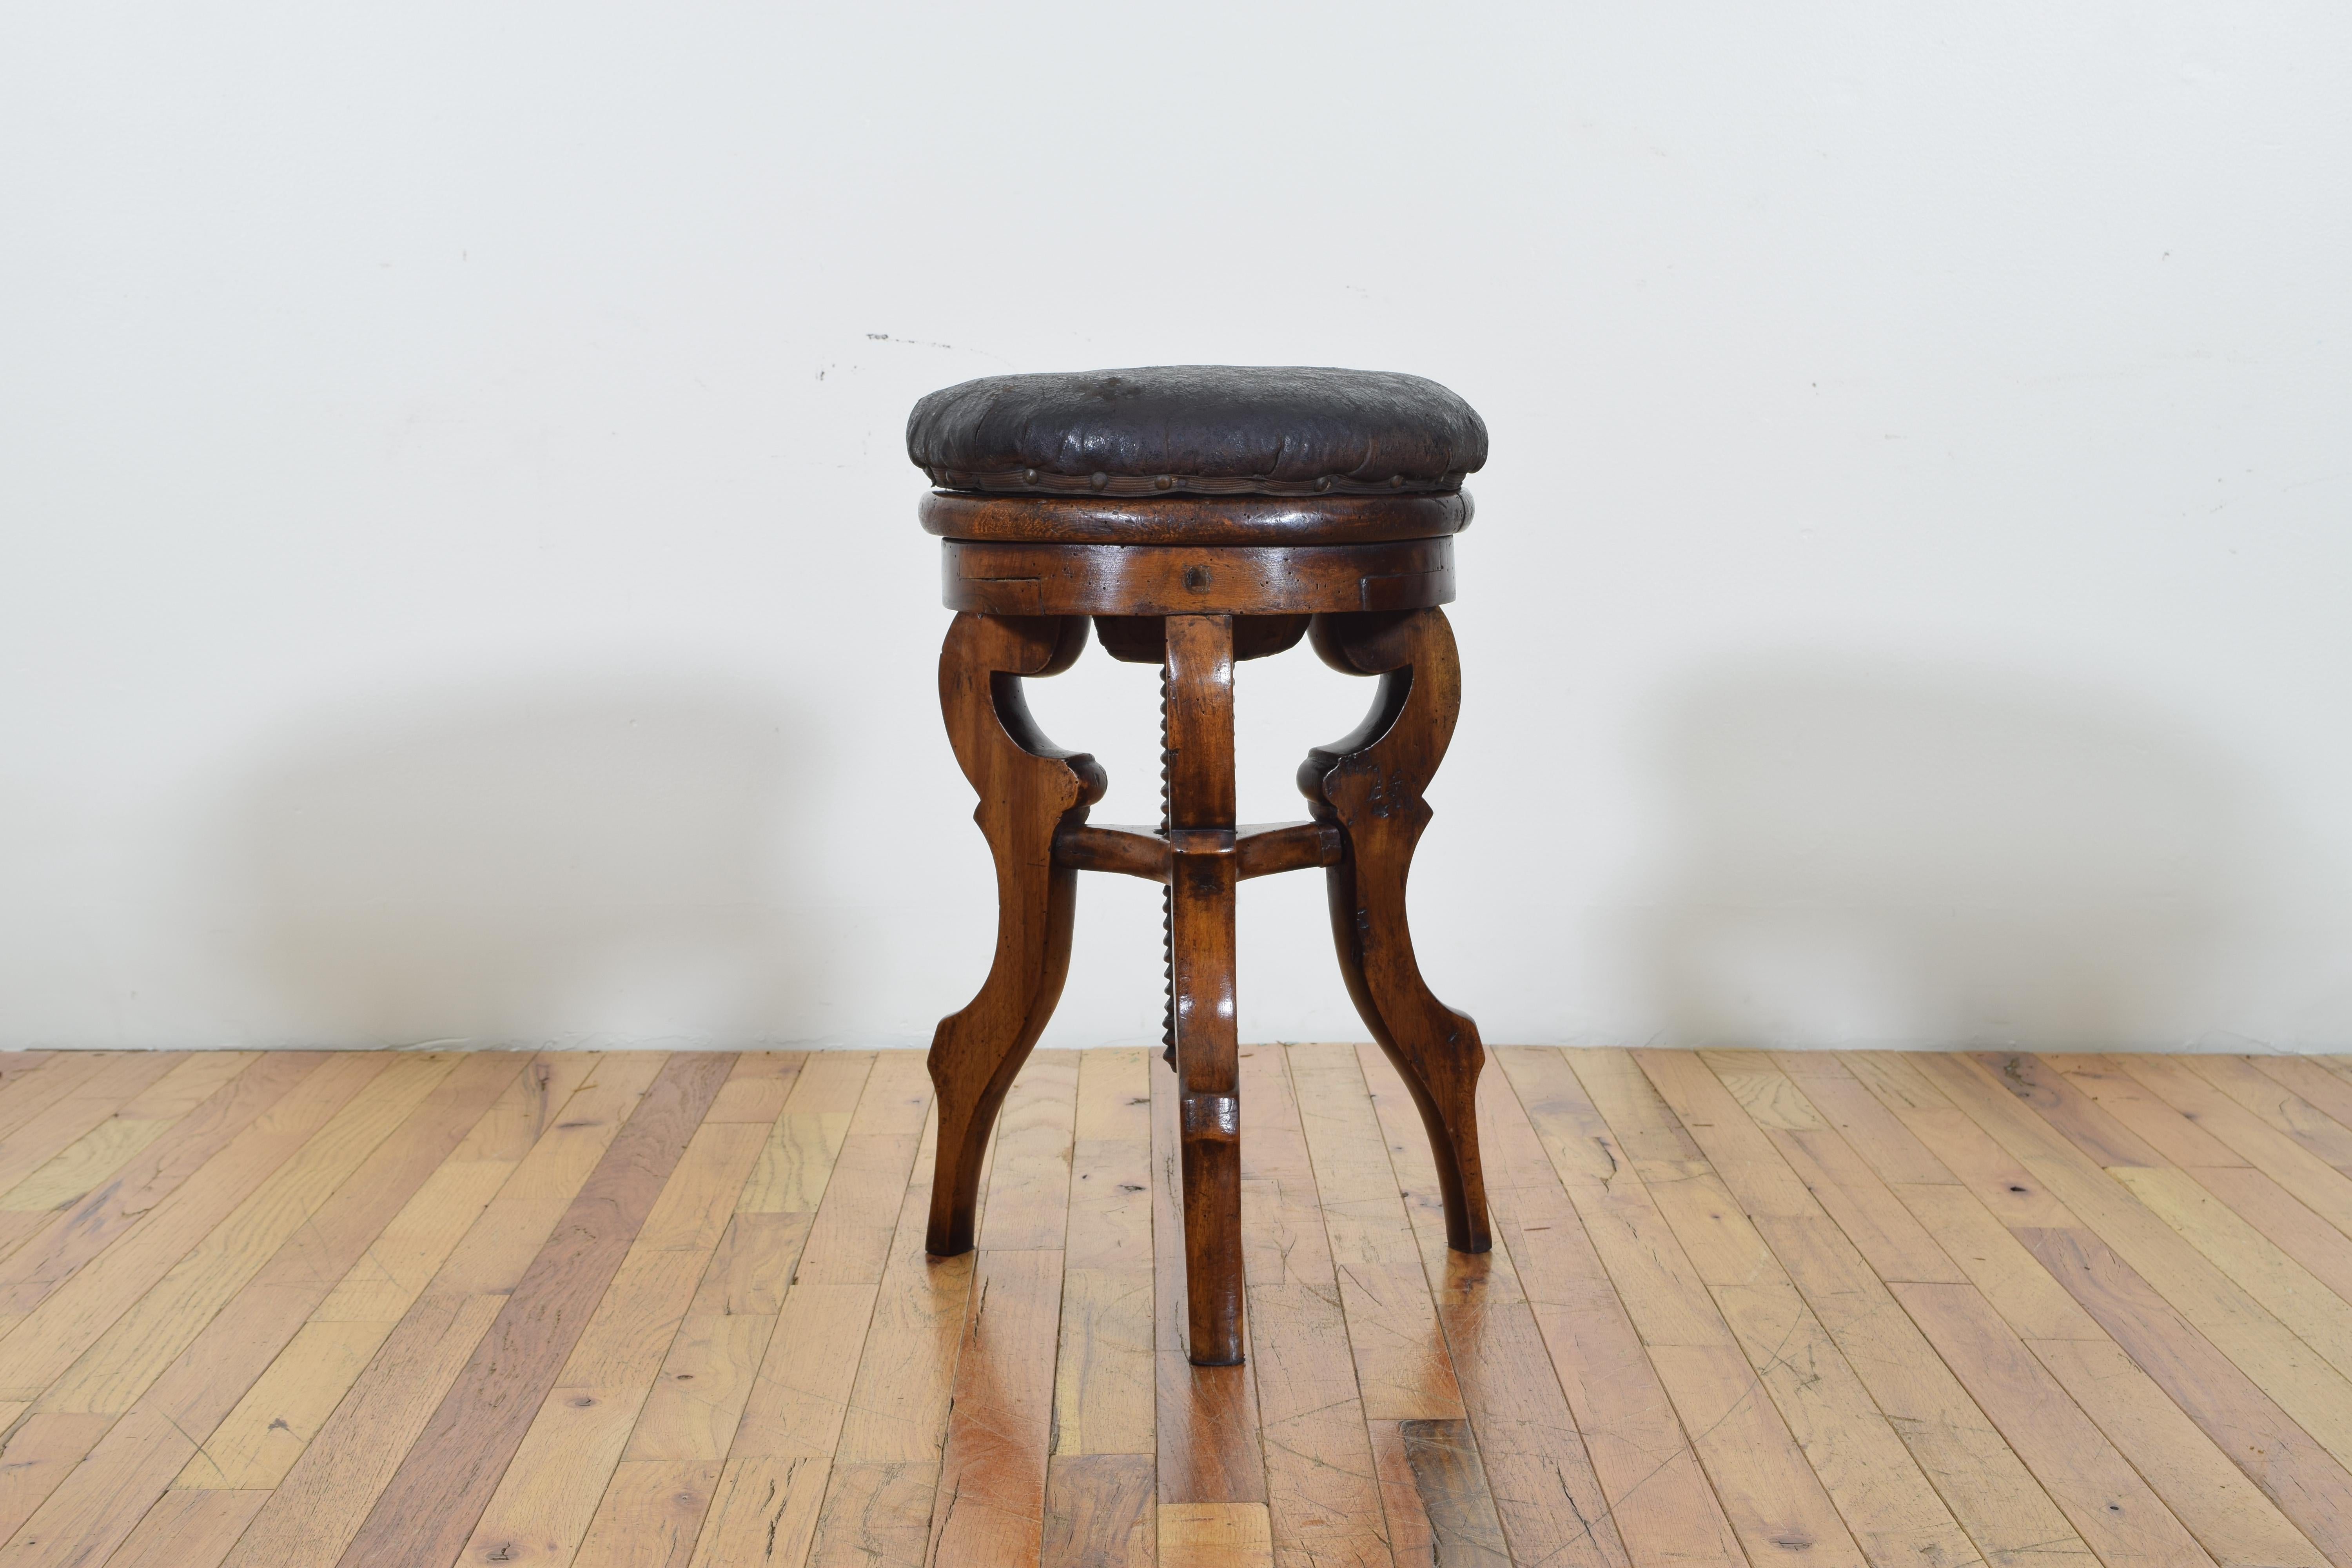 Hand-Carved Italian Walnut and Leather Upholstered Adjustable Stool, Mid-19th Century